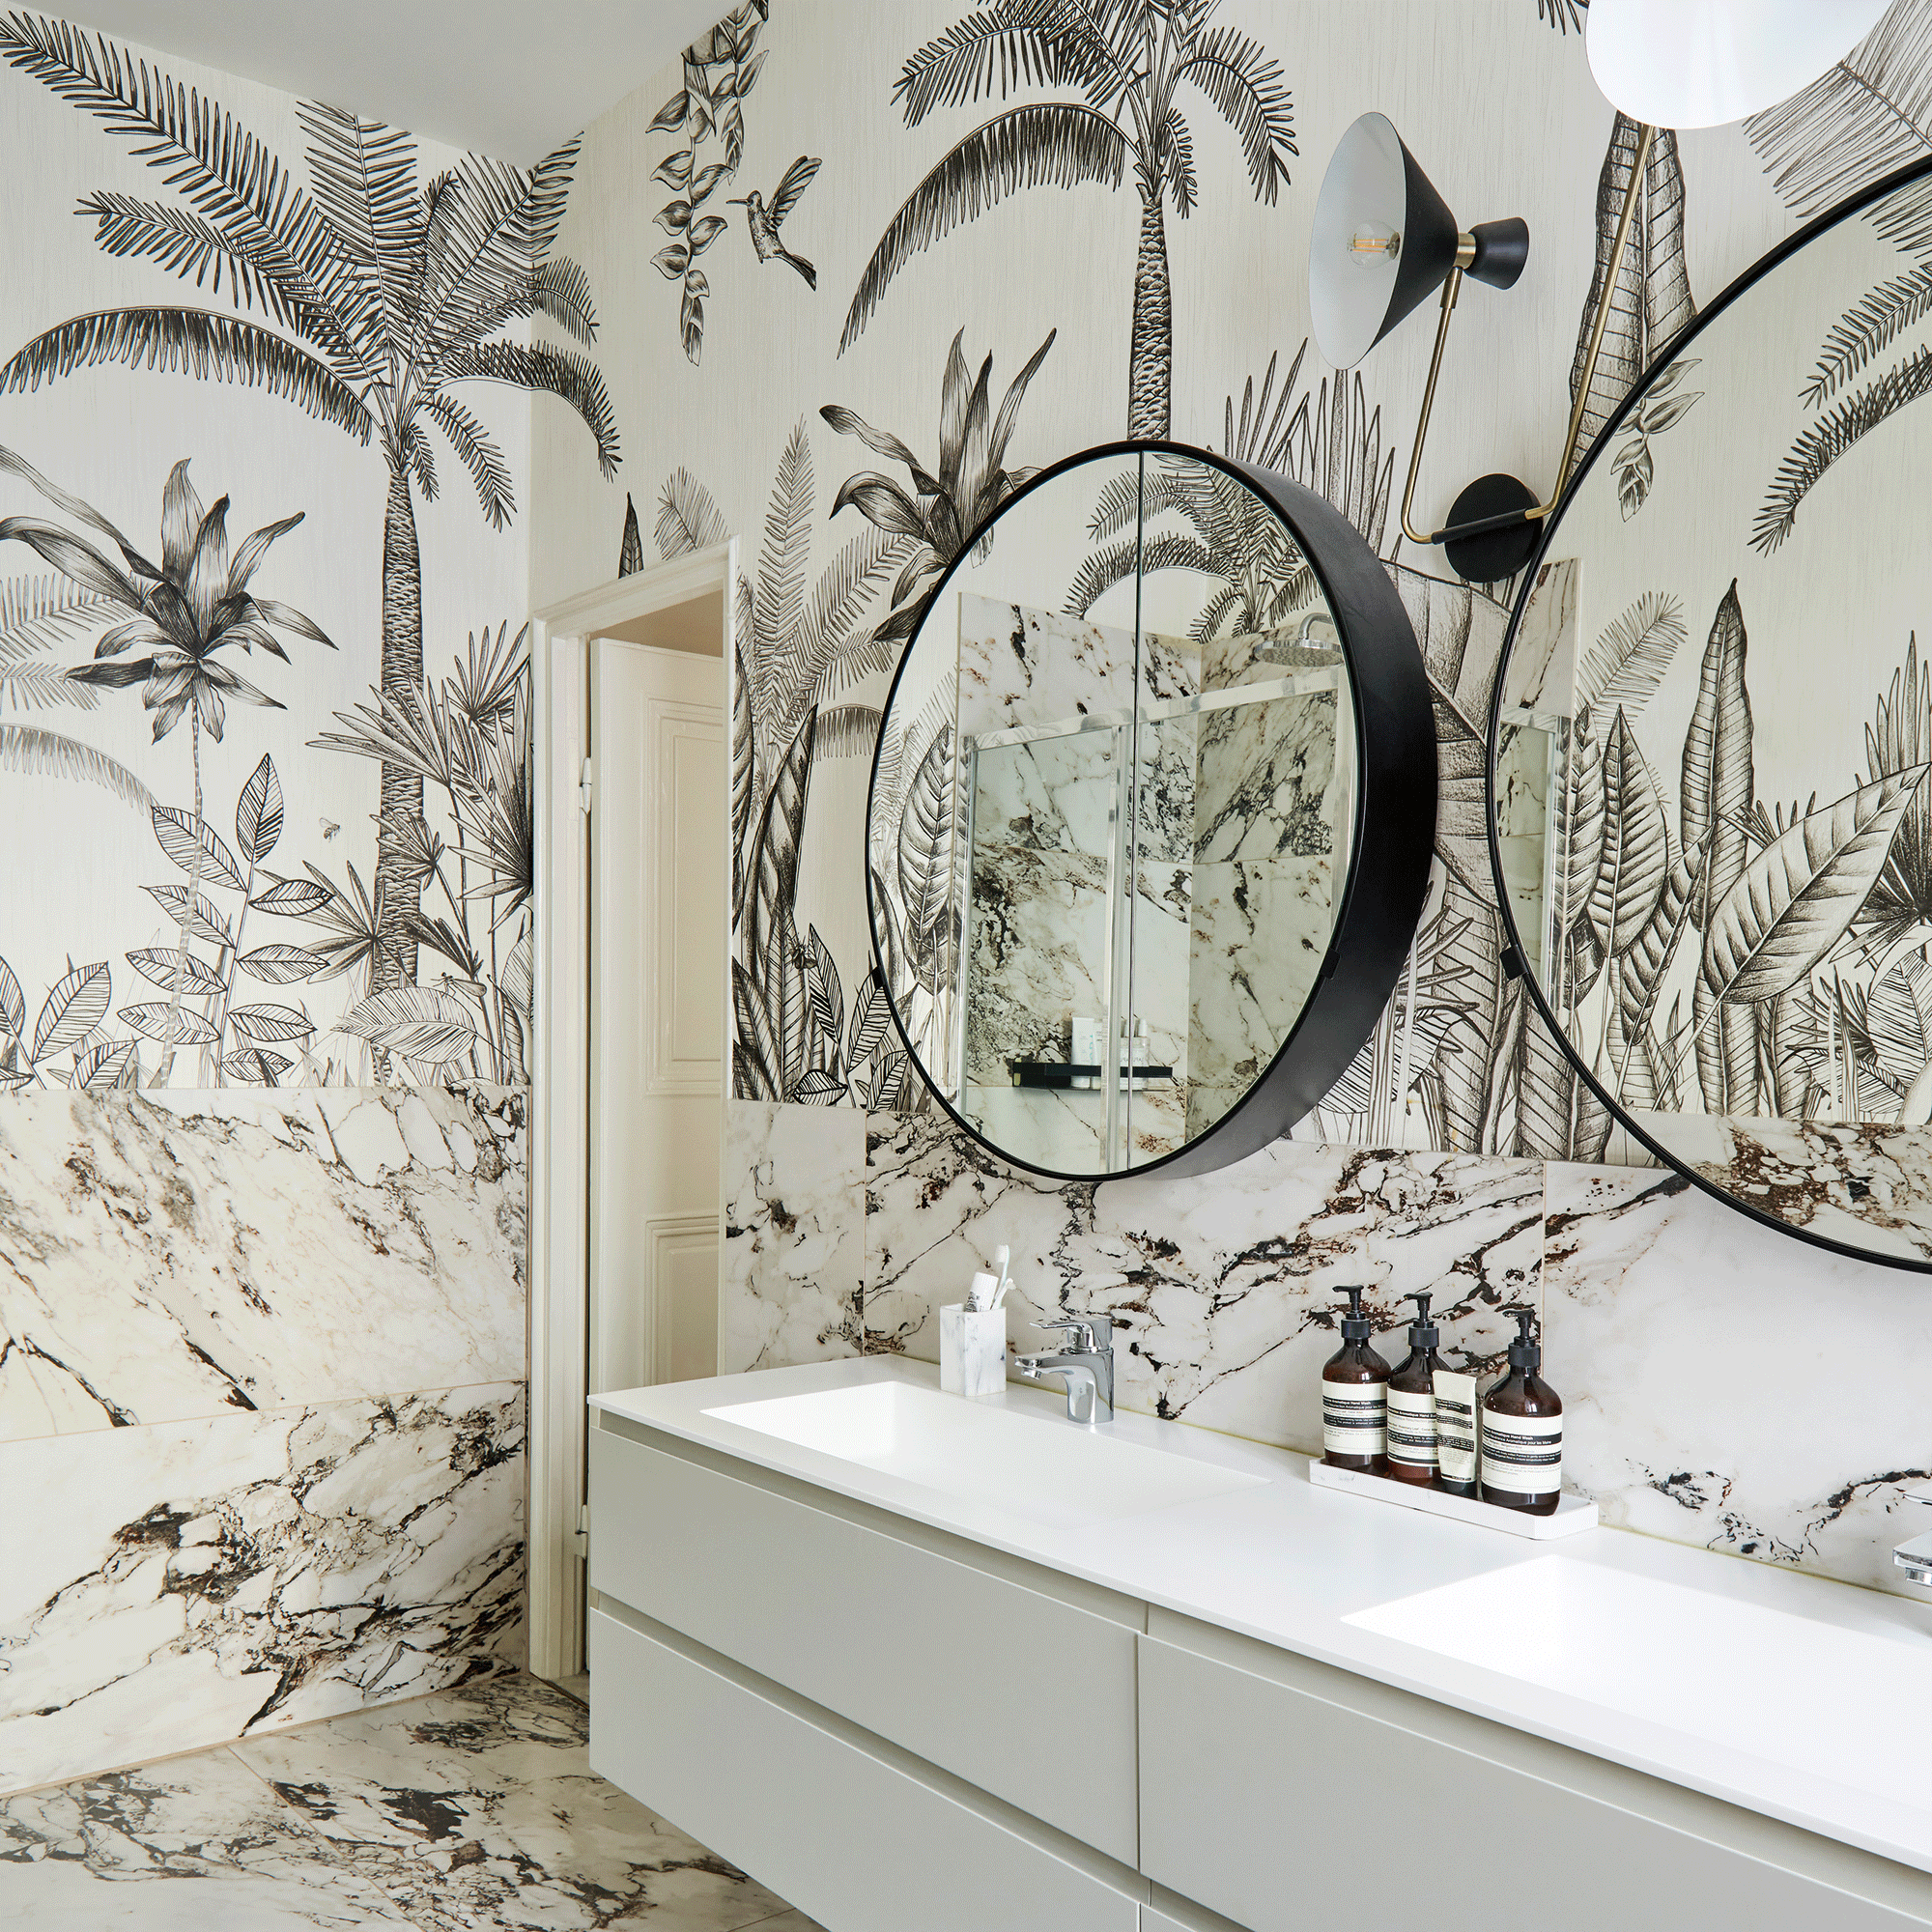 Round mirror in bathroom with palm tree wallpaper